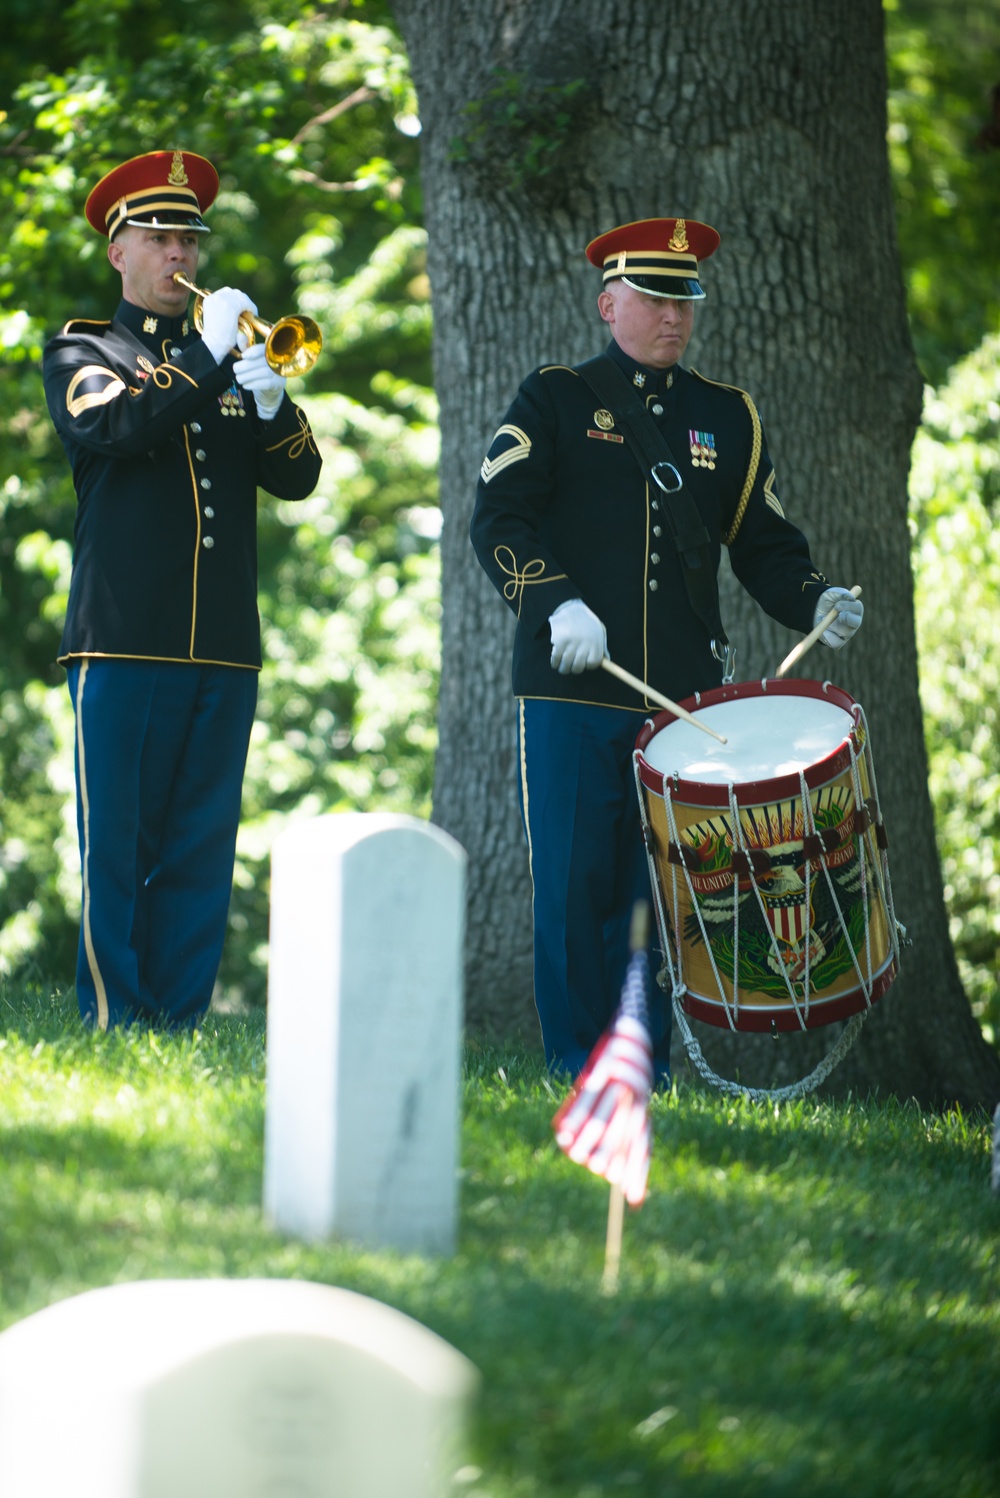 Brig. Gen. Roscoe C. Cartwright honored in a ceremony in Arlington National Cemetery